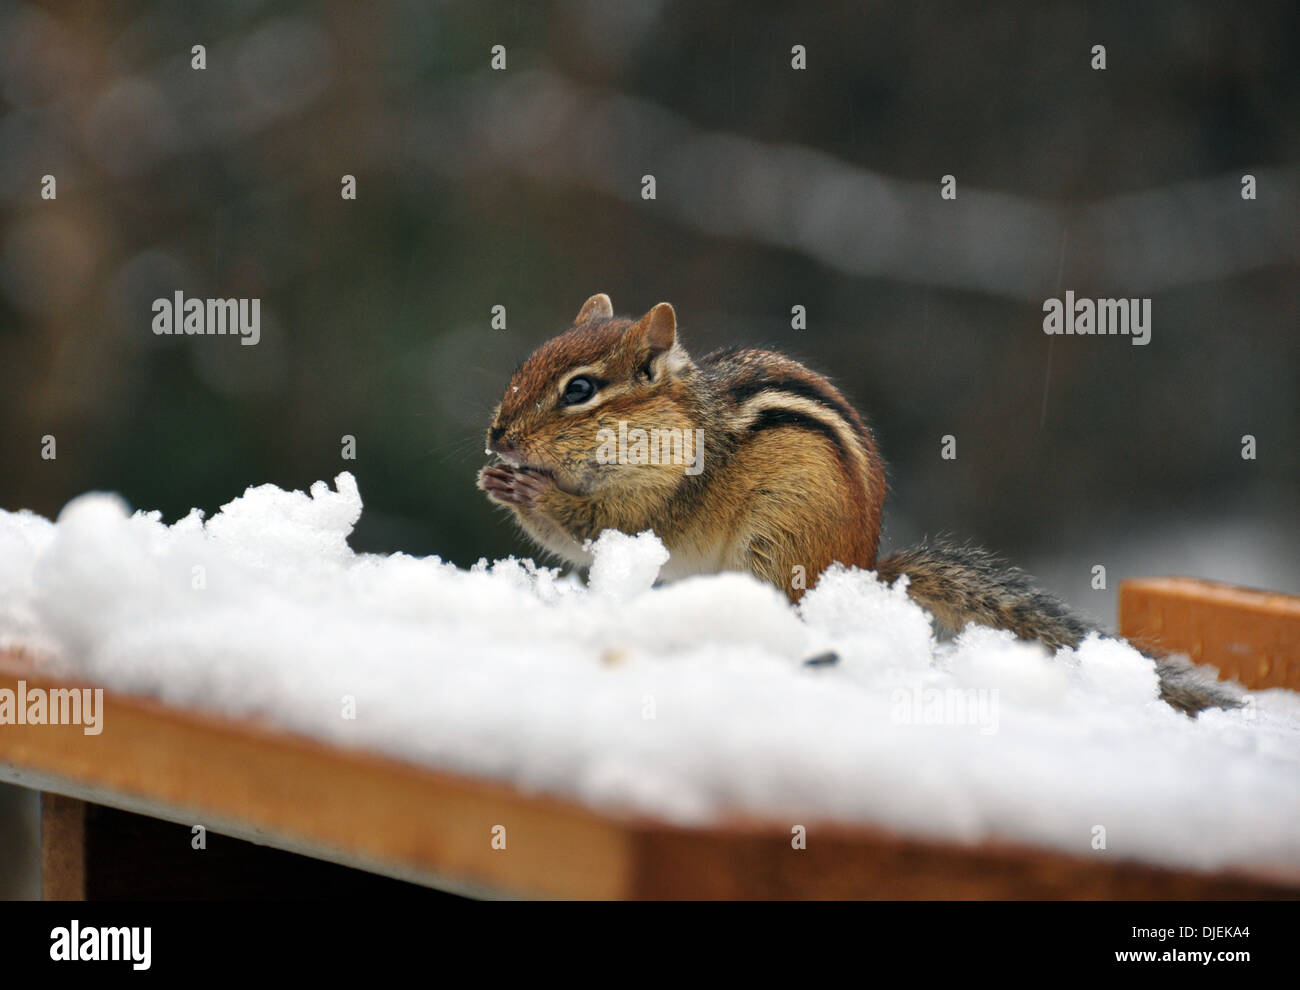 Cute chipmunk eating a snack in the snow. Stock Photo